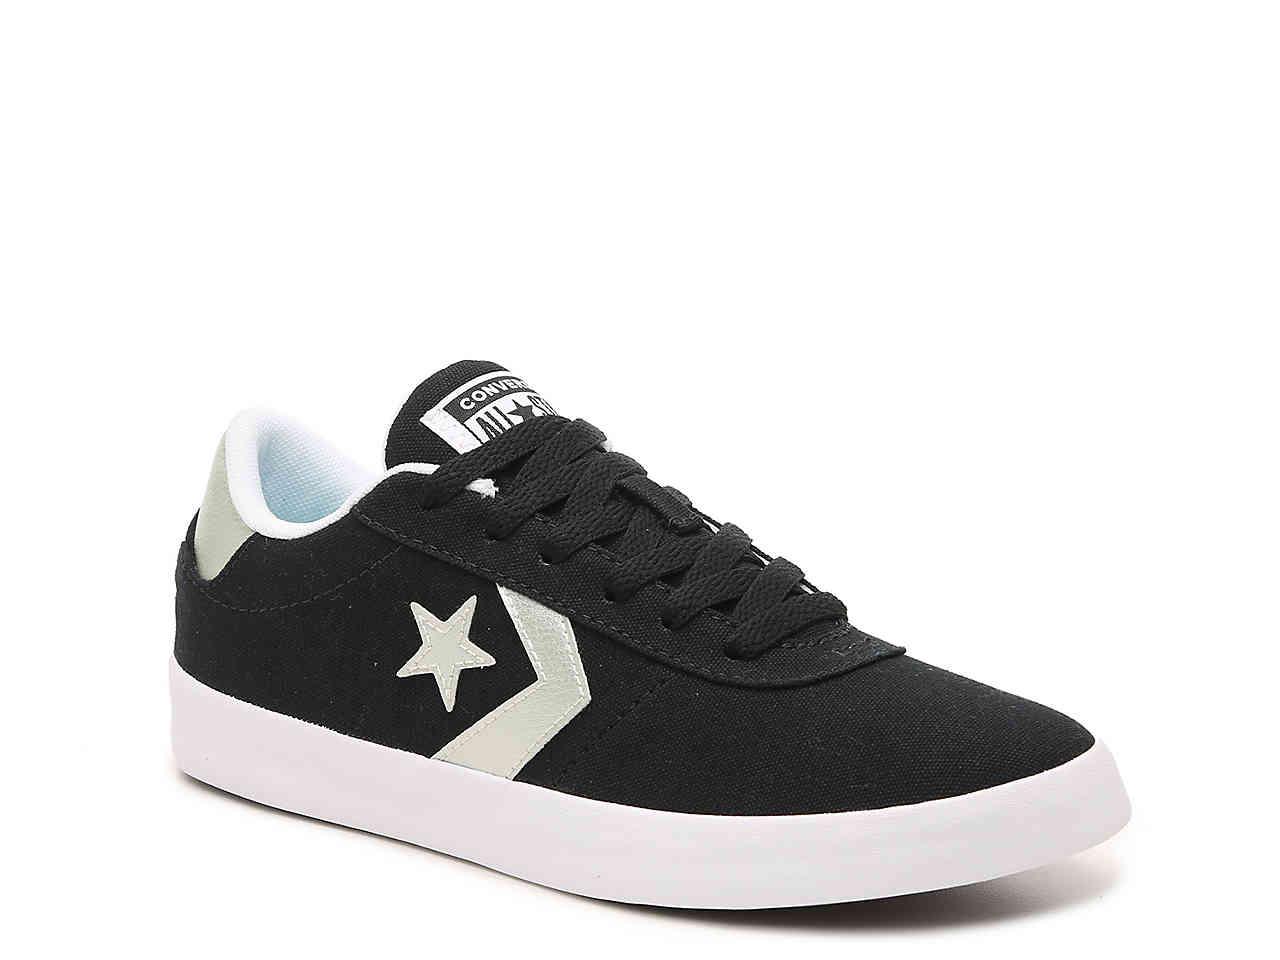 Converse Satin Point Star Ox Shoes 